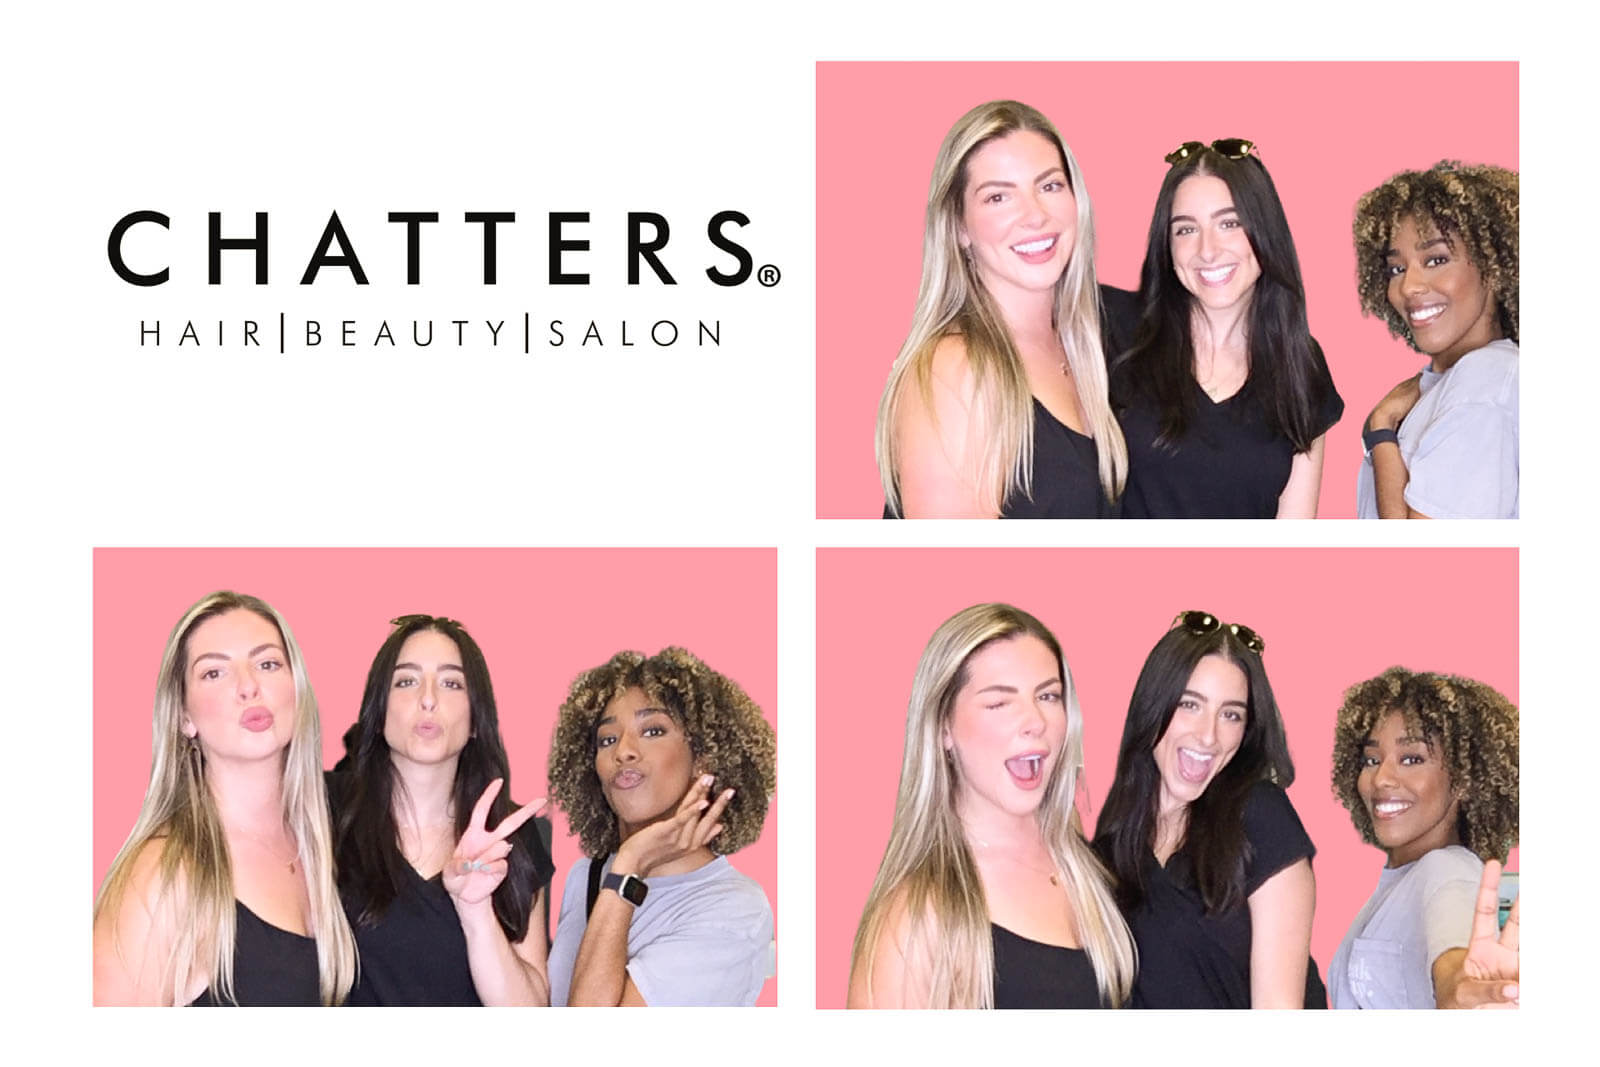 photo booth print from a hair salon with 3 lovely ladies posing using ai background removal